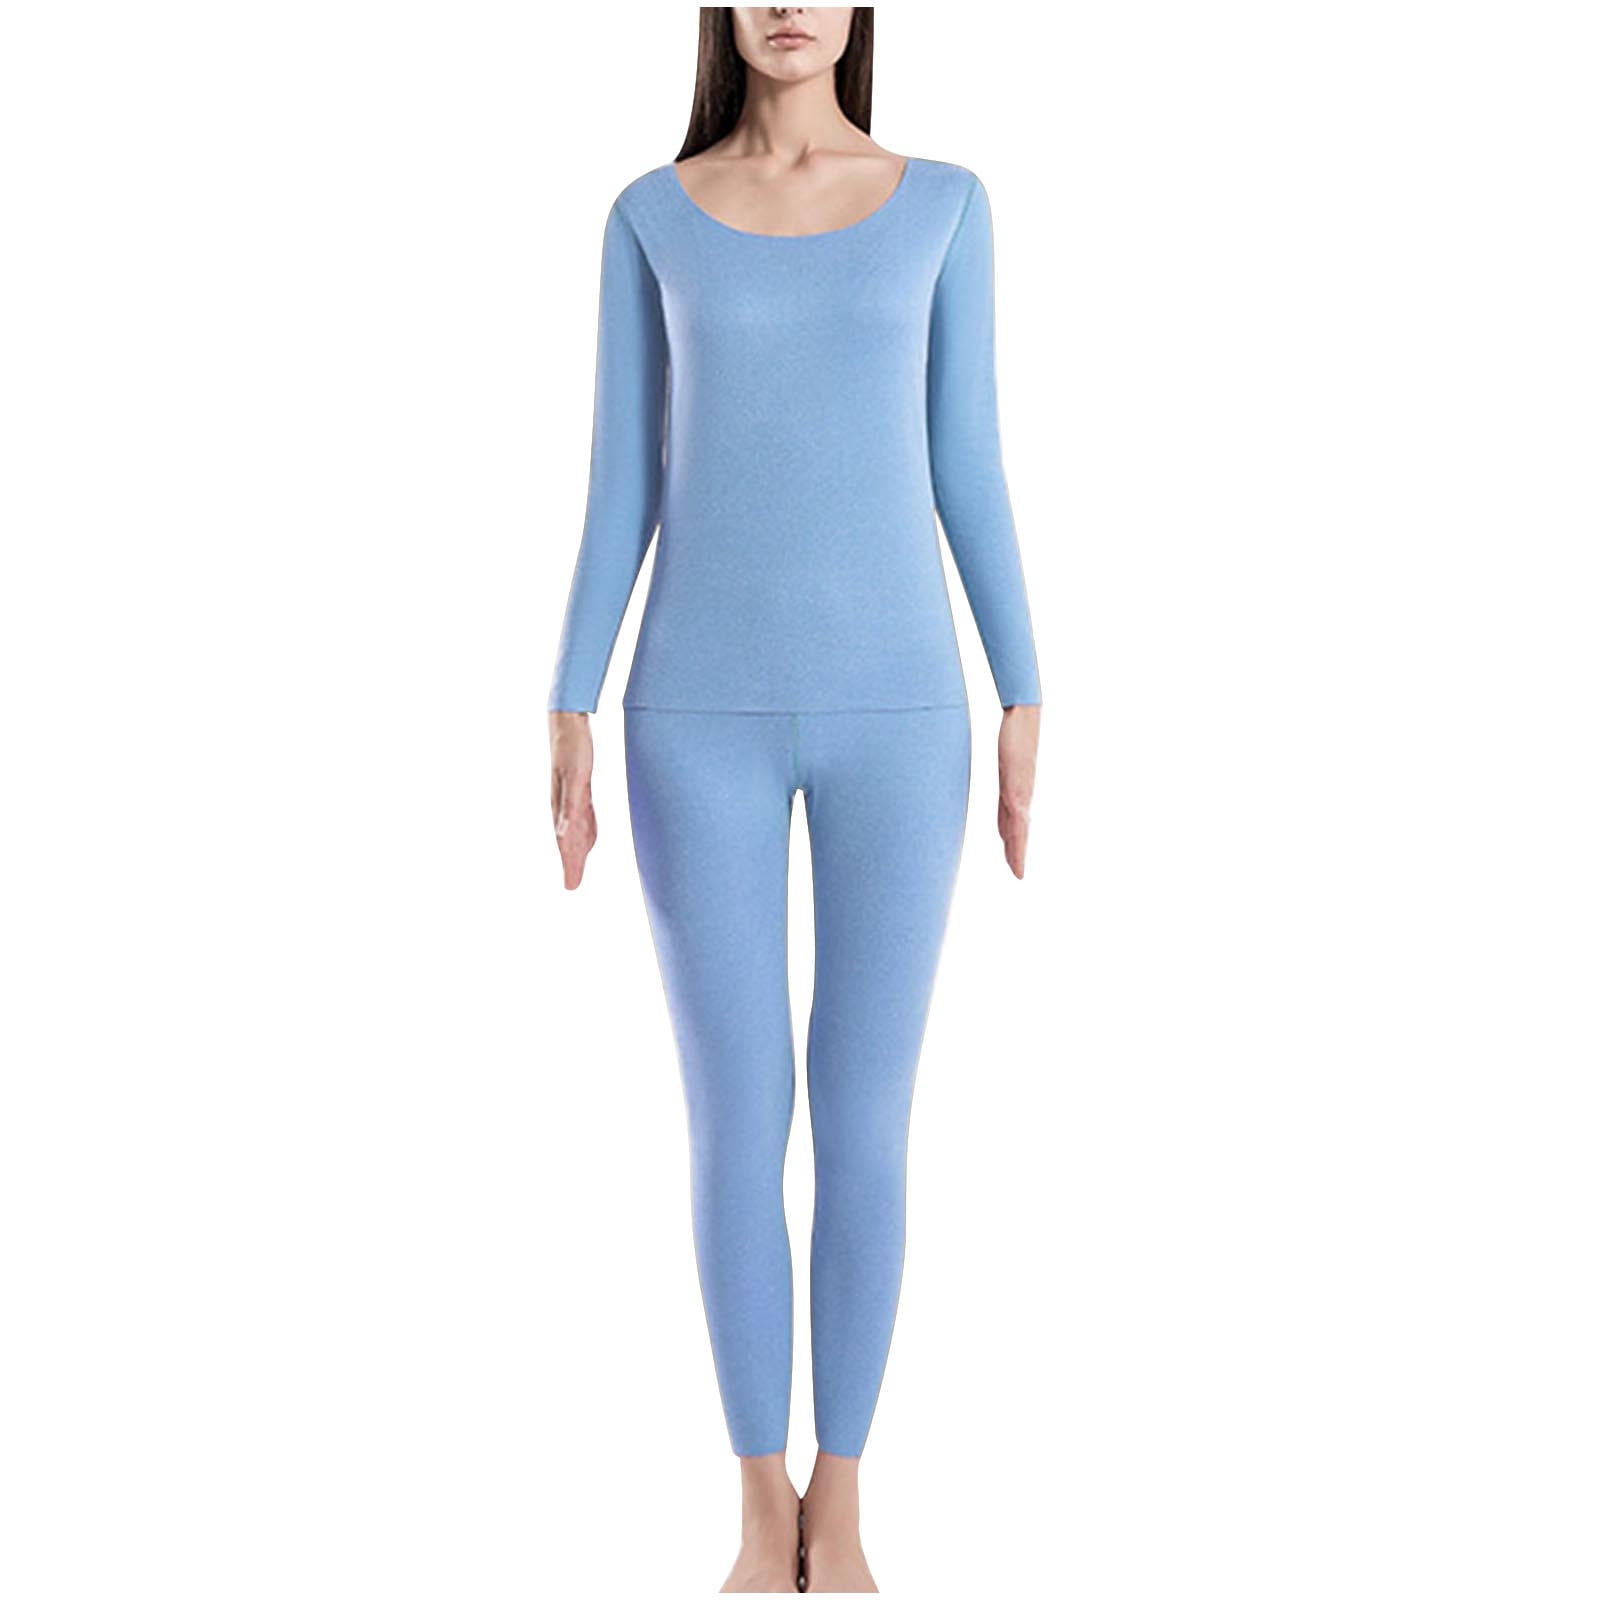 Thermal Underwear for Women 2 Piece Long Sleeve Long Johns Base Layer Top &  Bottom Fleece Lined Winter Warm Outfit 